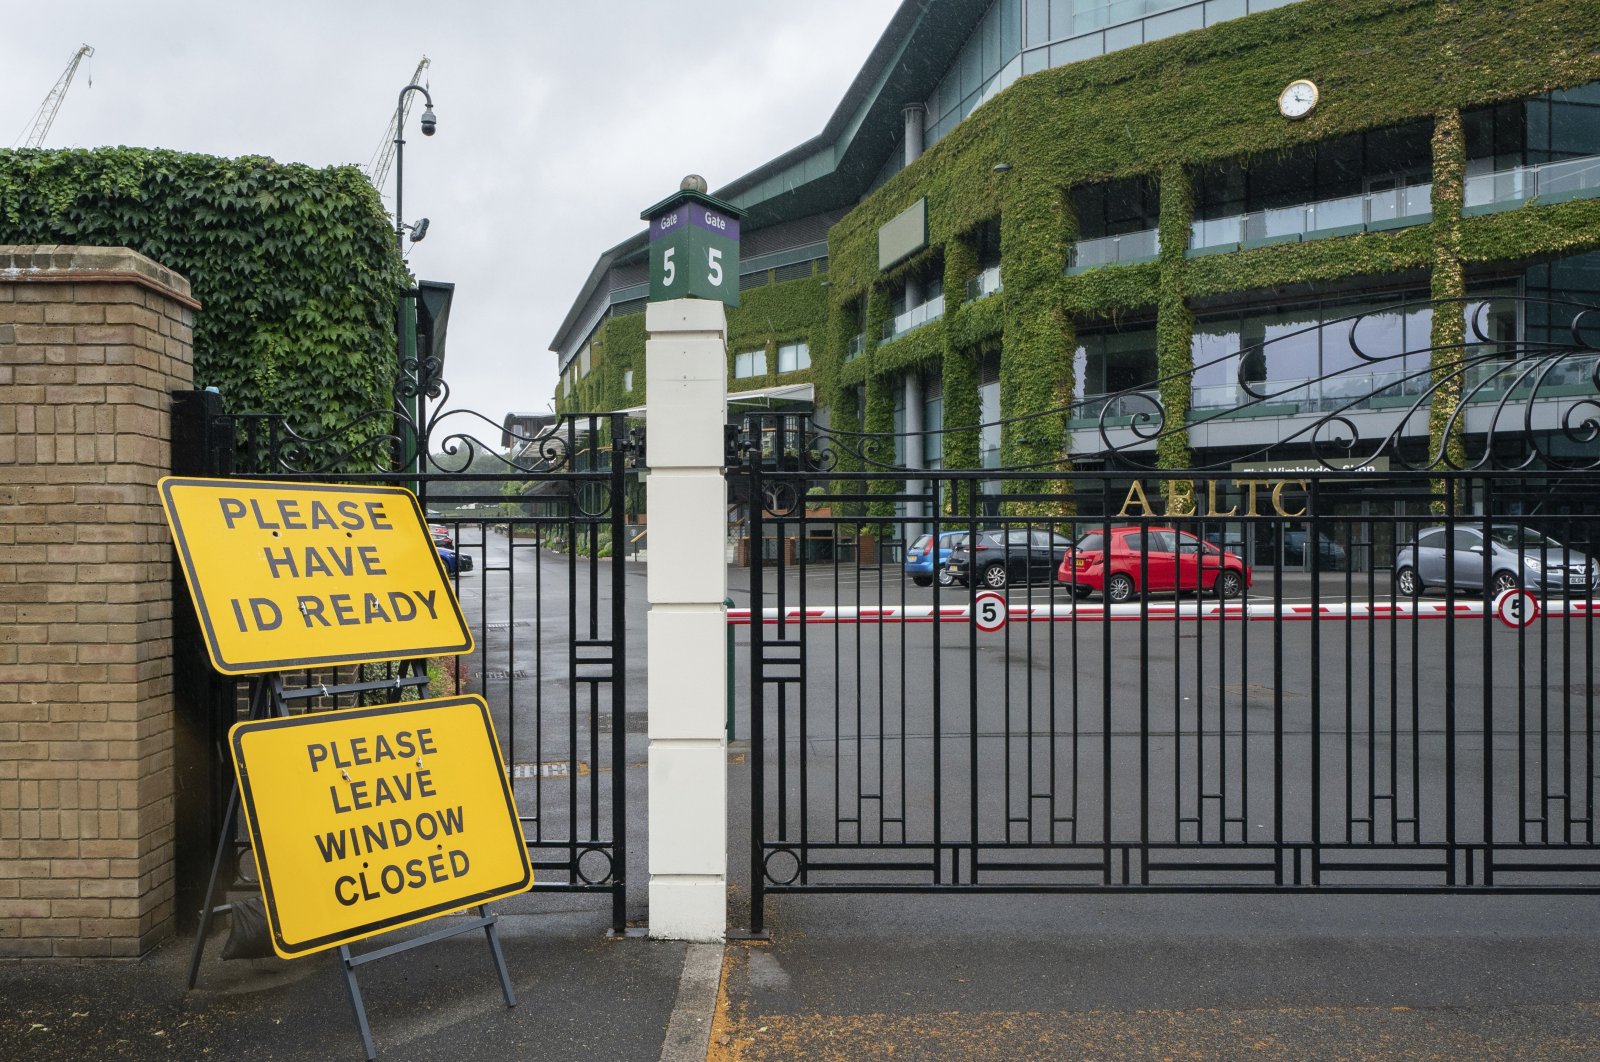 A view outside the main gate at the All England Lawn Tennis Club in Wimbledon, London, June 27, 2020, the weekend before The Championships were due to start. (AP Photo)